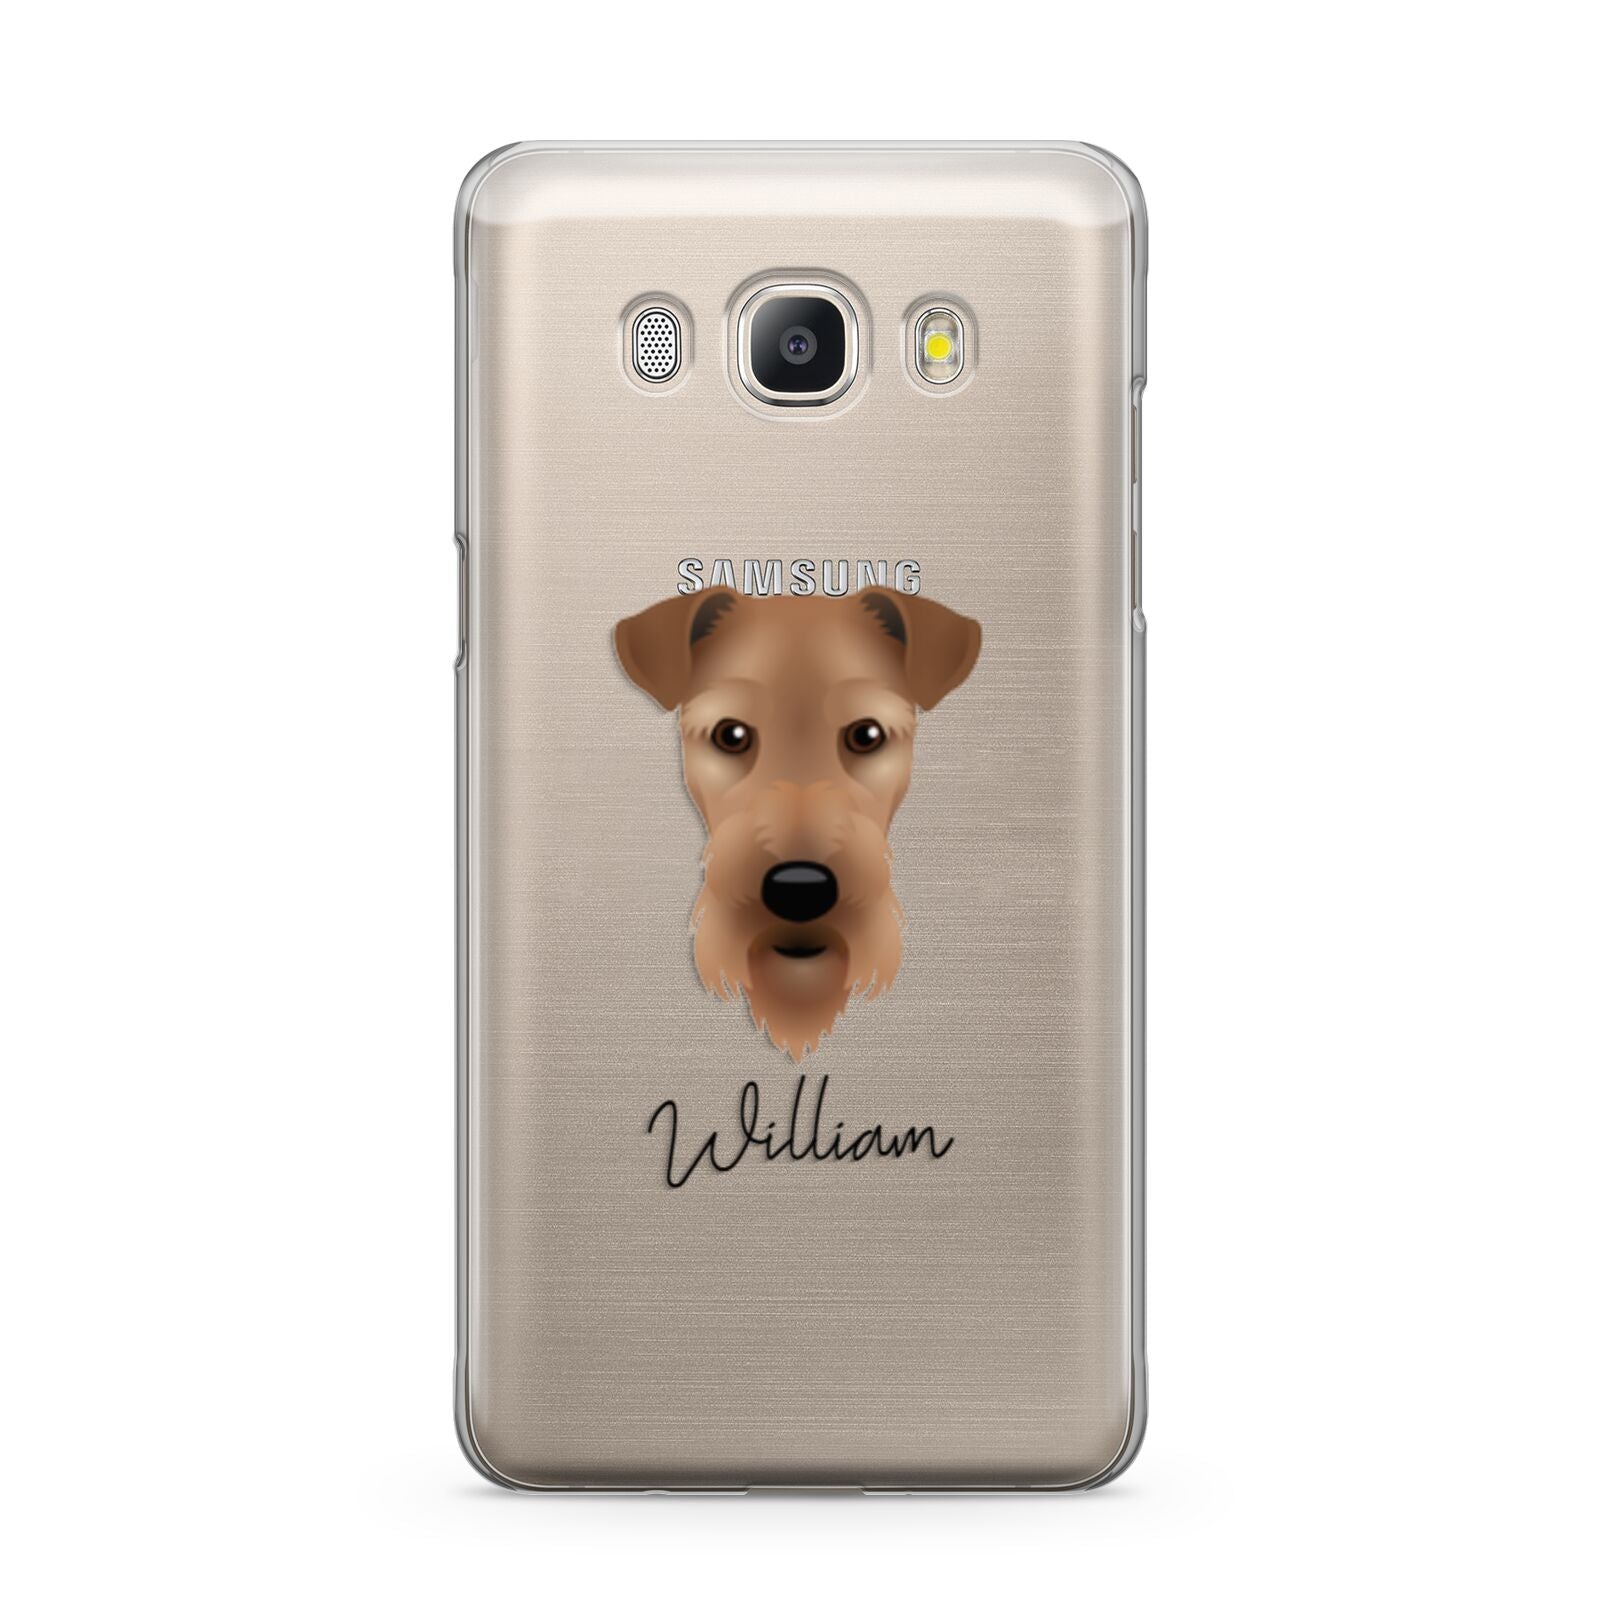 Airedale Terrier Personalised Samsung Galaxy J5 2016 Case